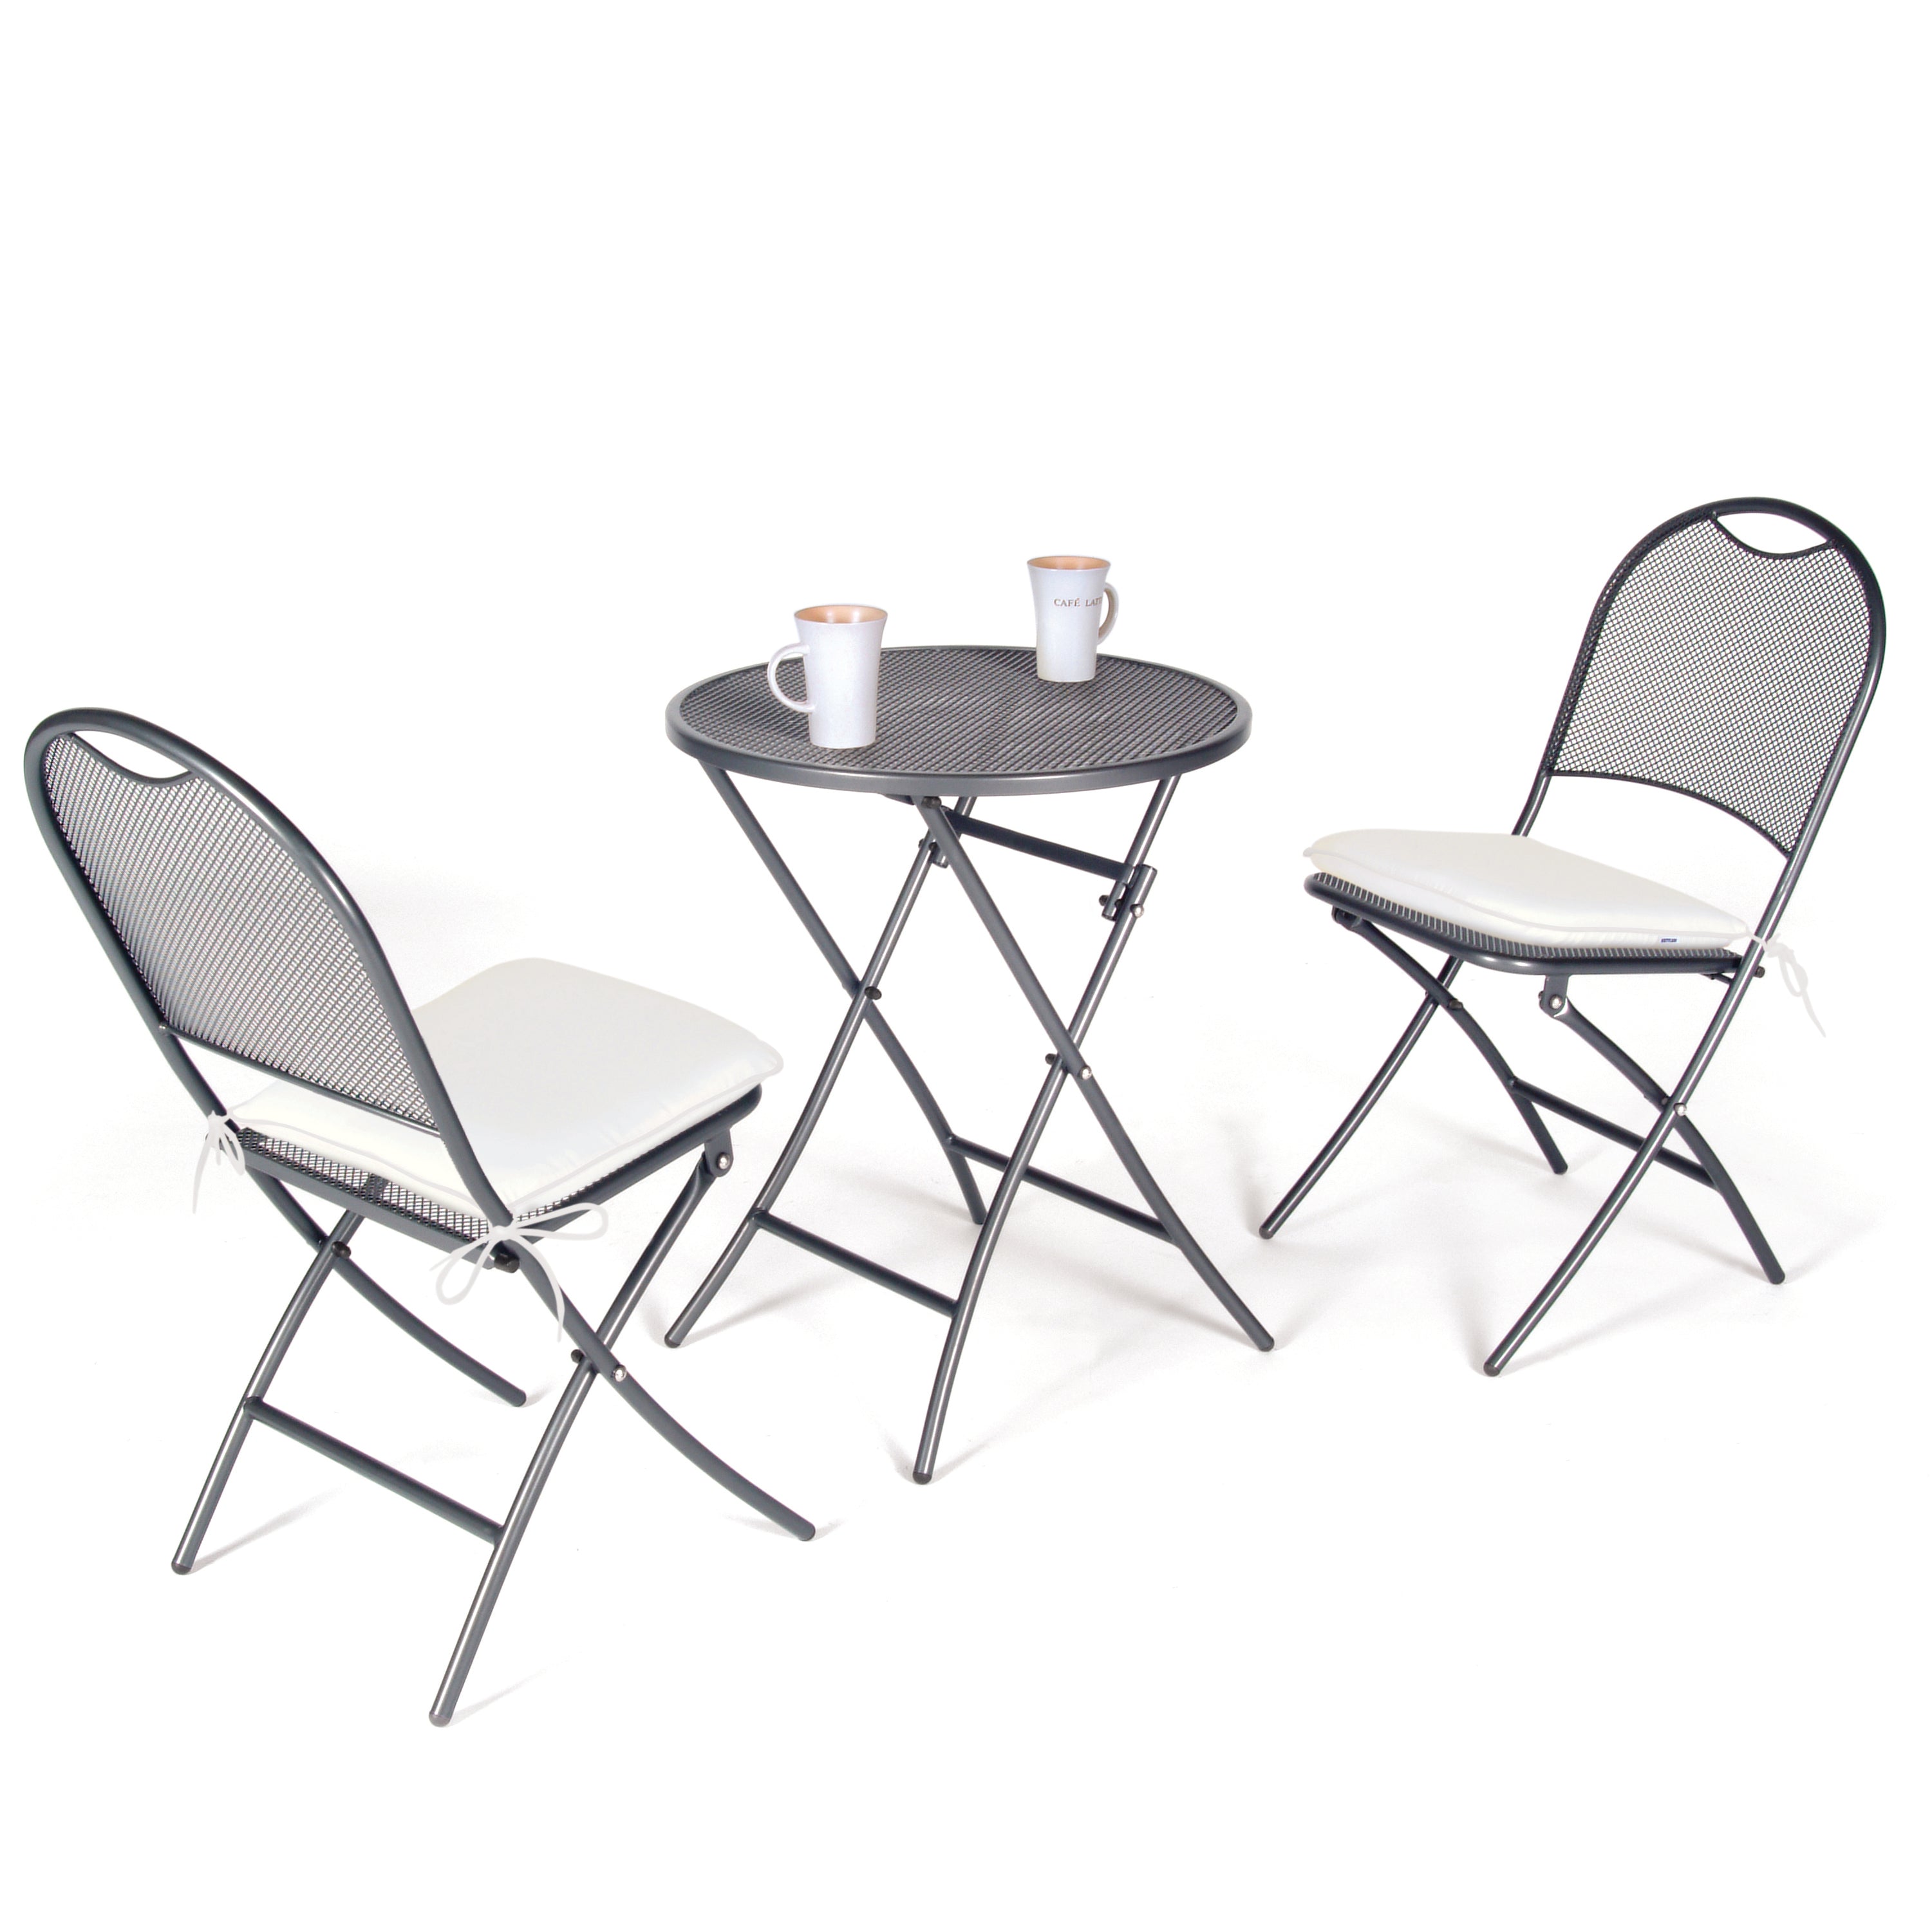 Three piece small cafe wrought iron set, foldable for storage